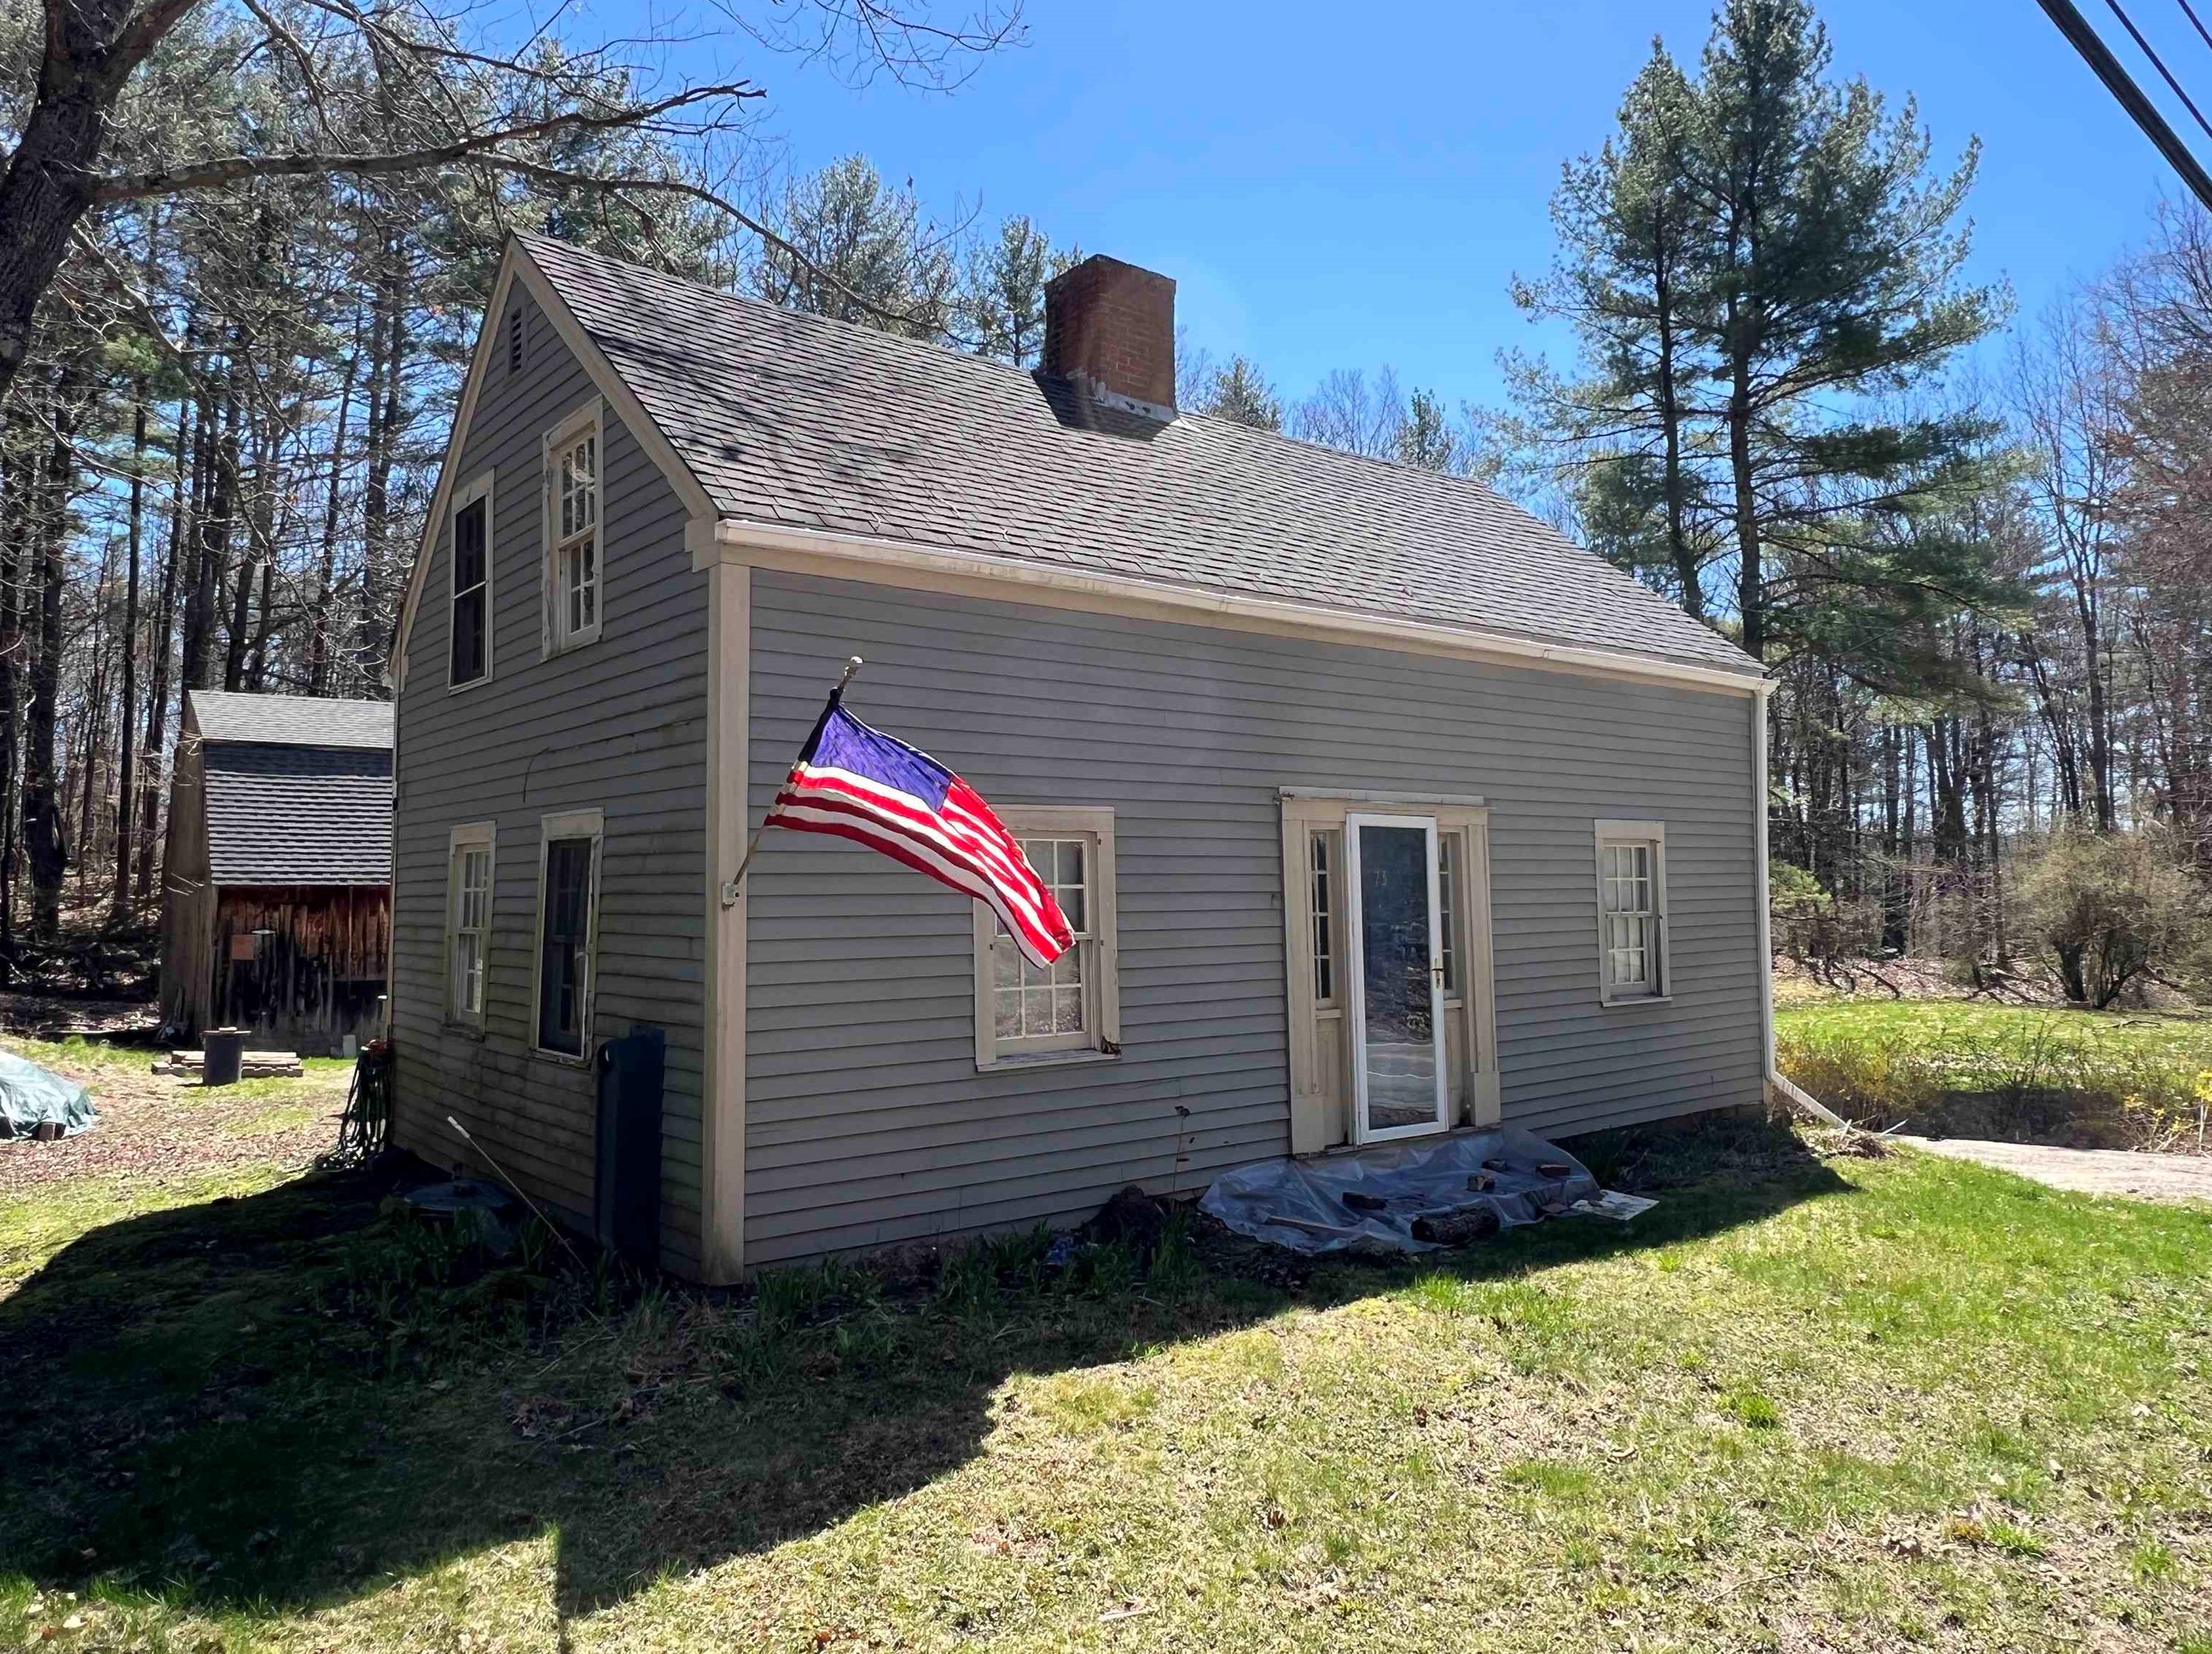 73 Newmarket Rd, Lee, NH